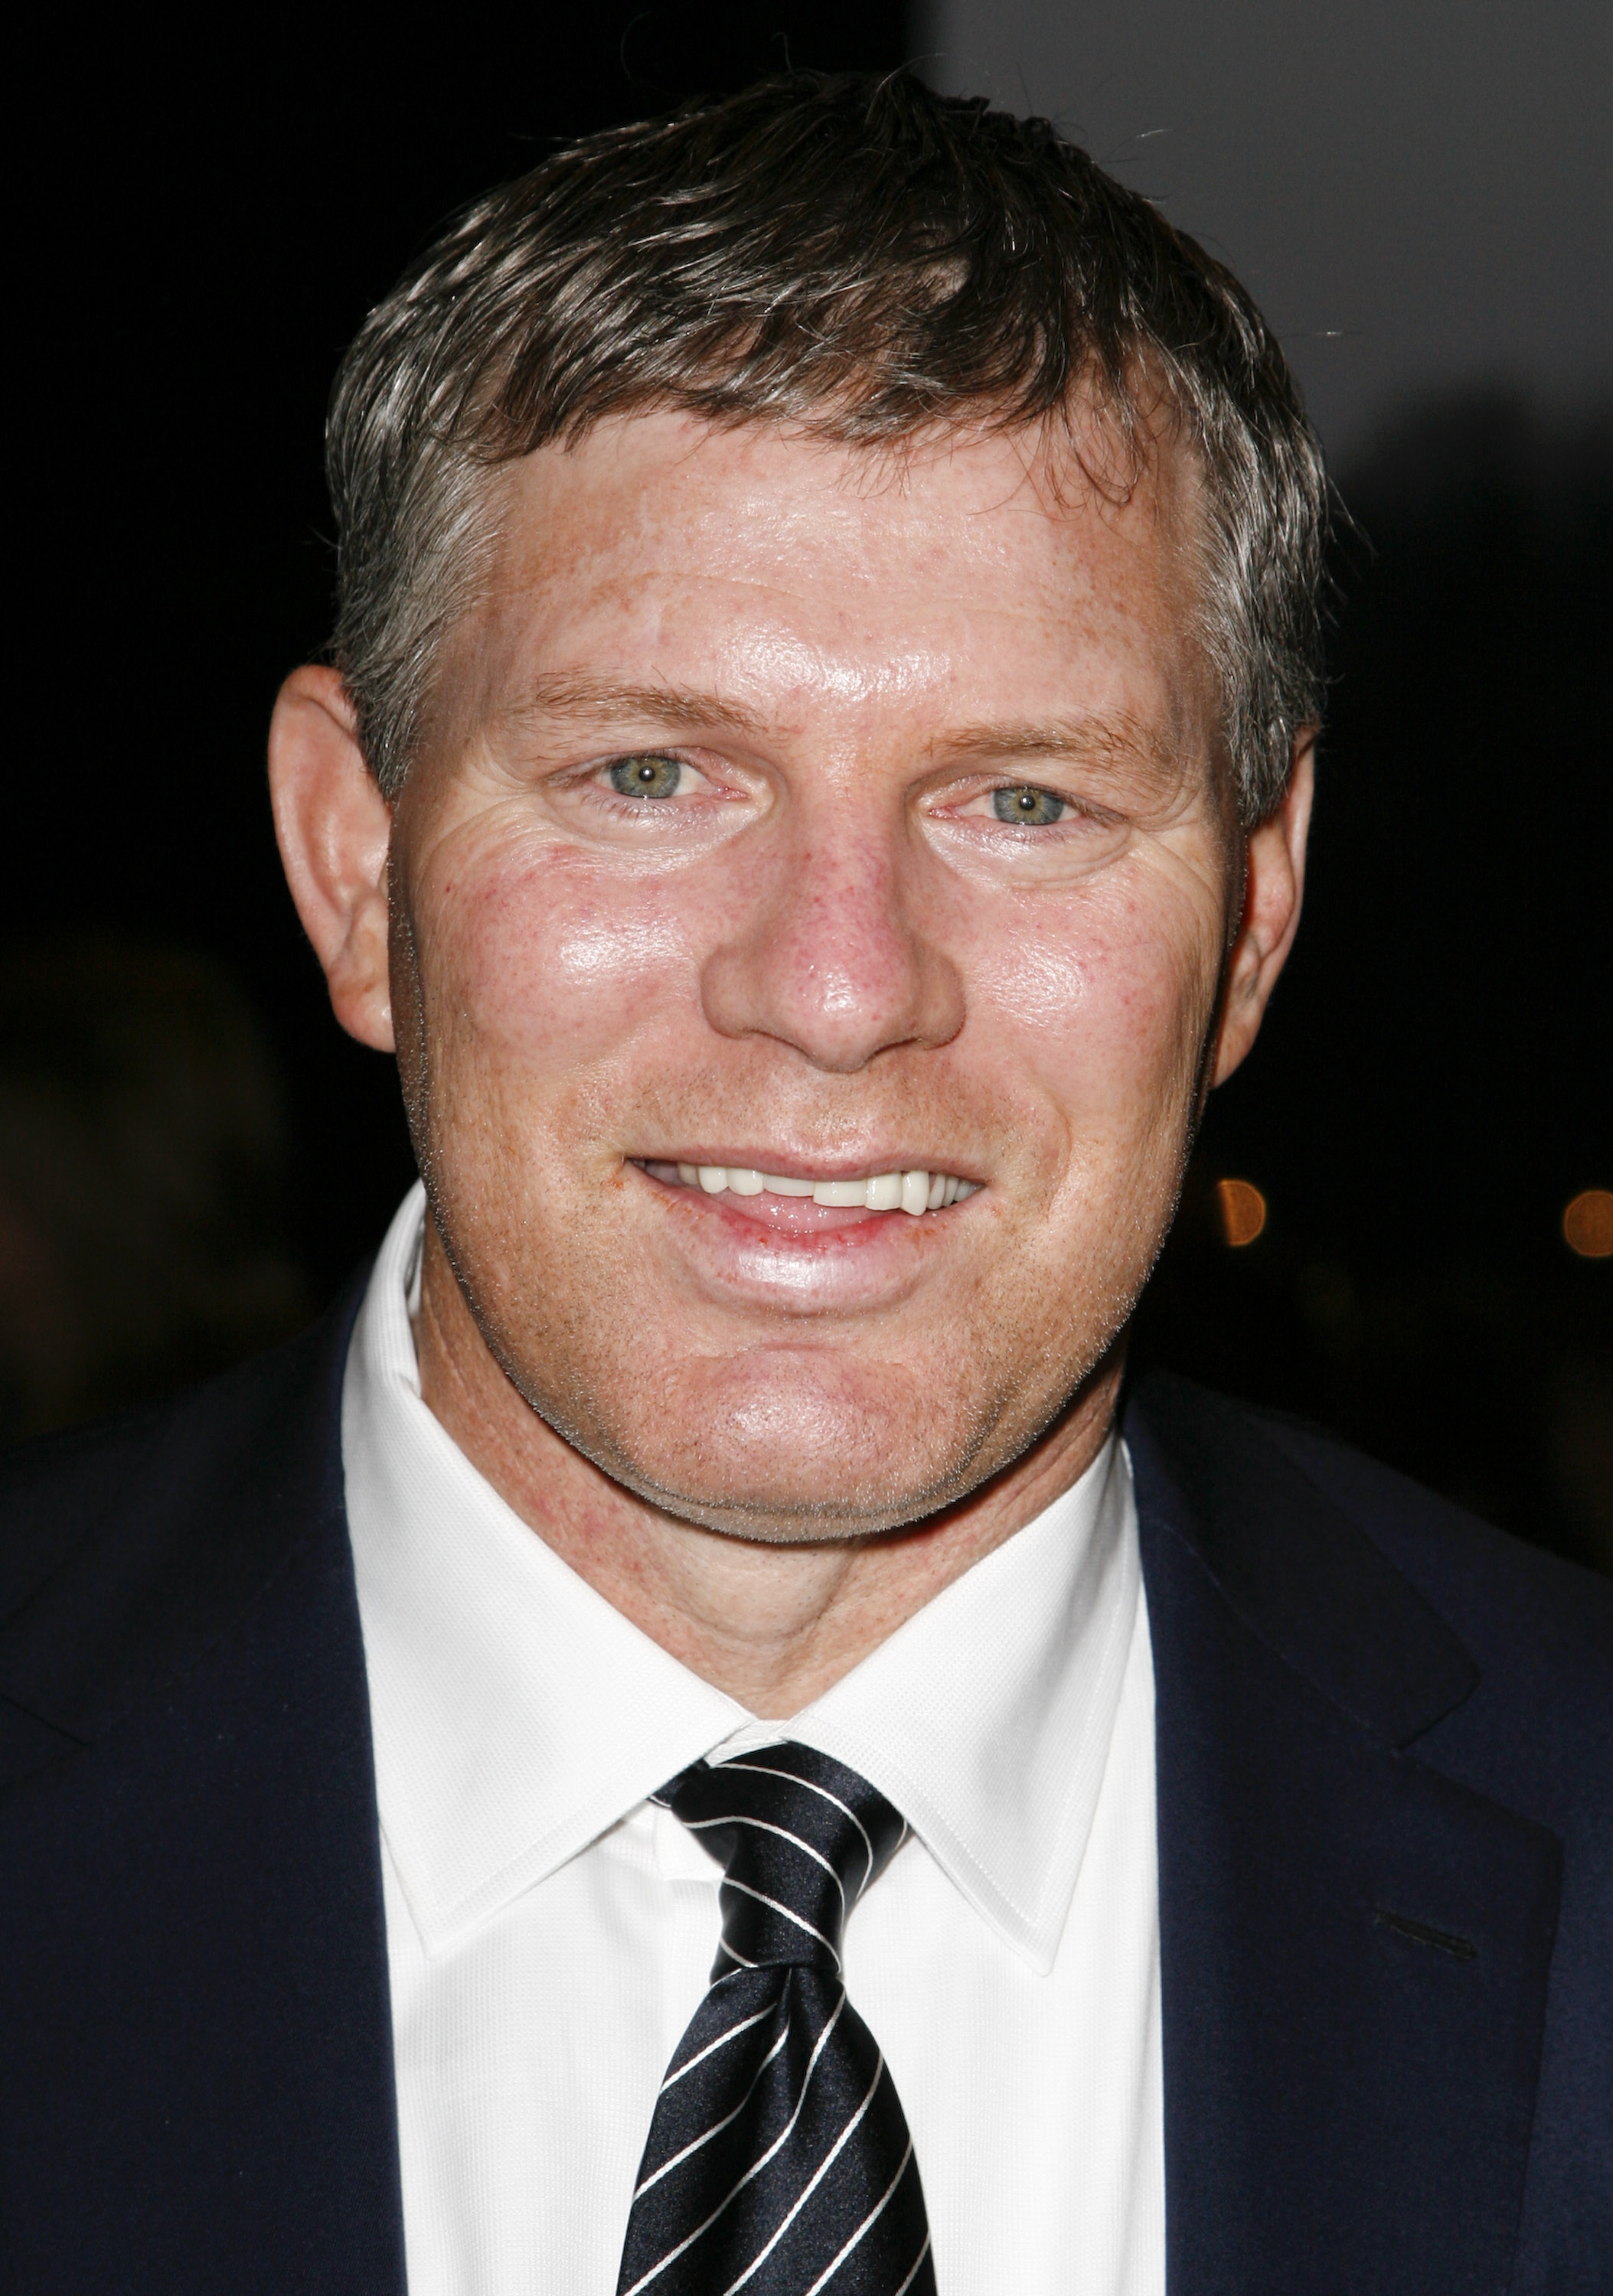 NEW YORK - APRIL 1:  Lenny Dykstra attends the launch party for Players Club Magazine at the Mandarin Oriental Hotel on April 1, 2008 in New York City.  (Photo by Amy Sussman/Getty Images)